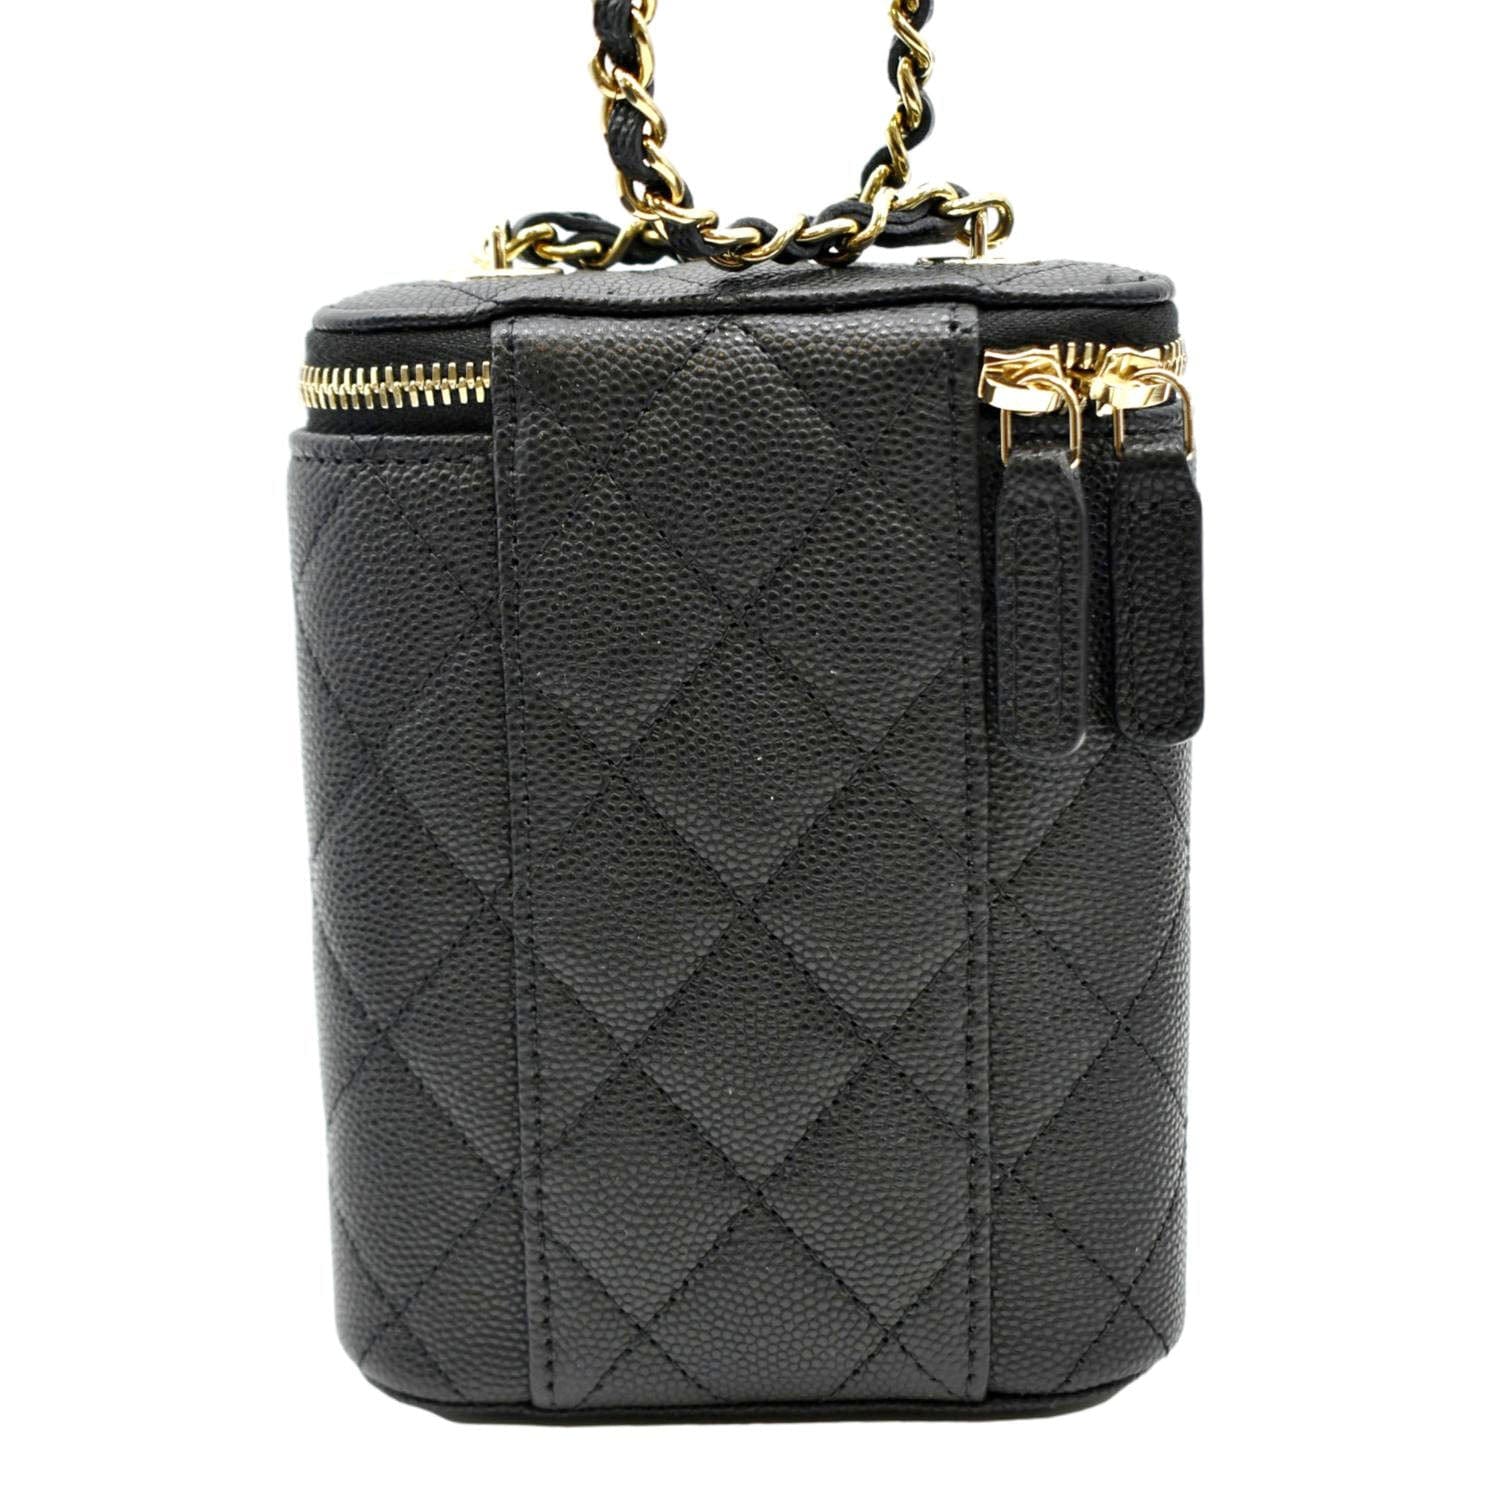 Tiny Chanel + Louis Vuitton Bags - Mini Quilted Handbags with Real Chain 